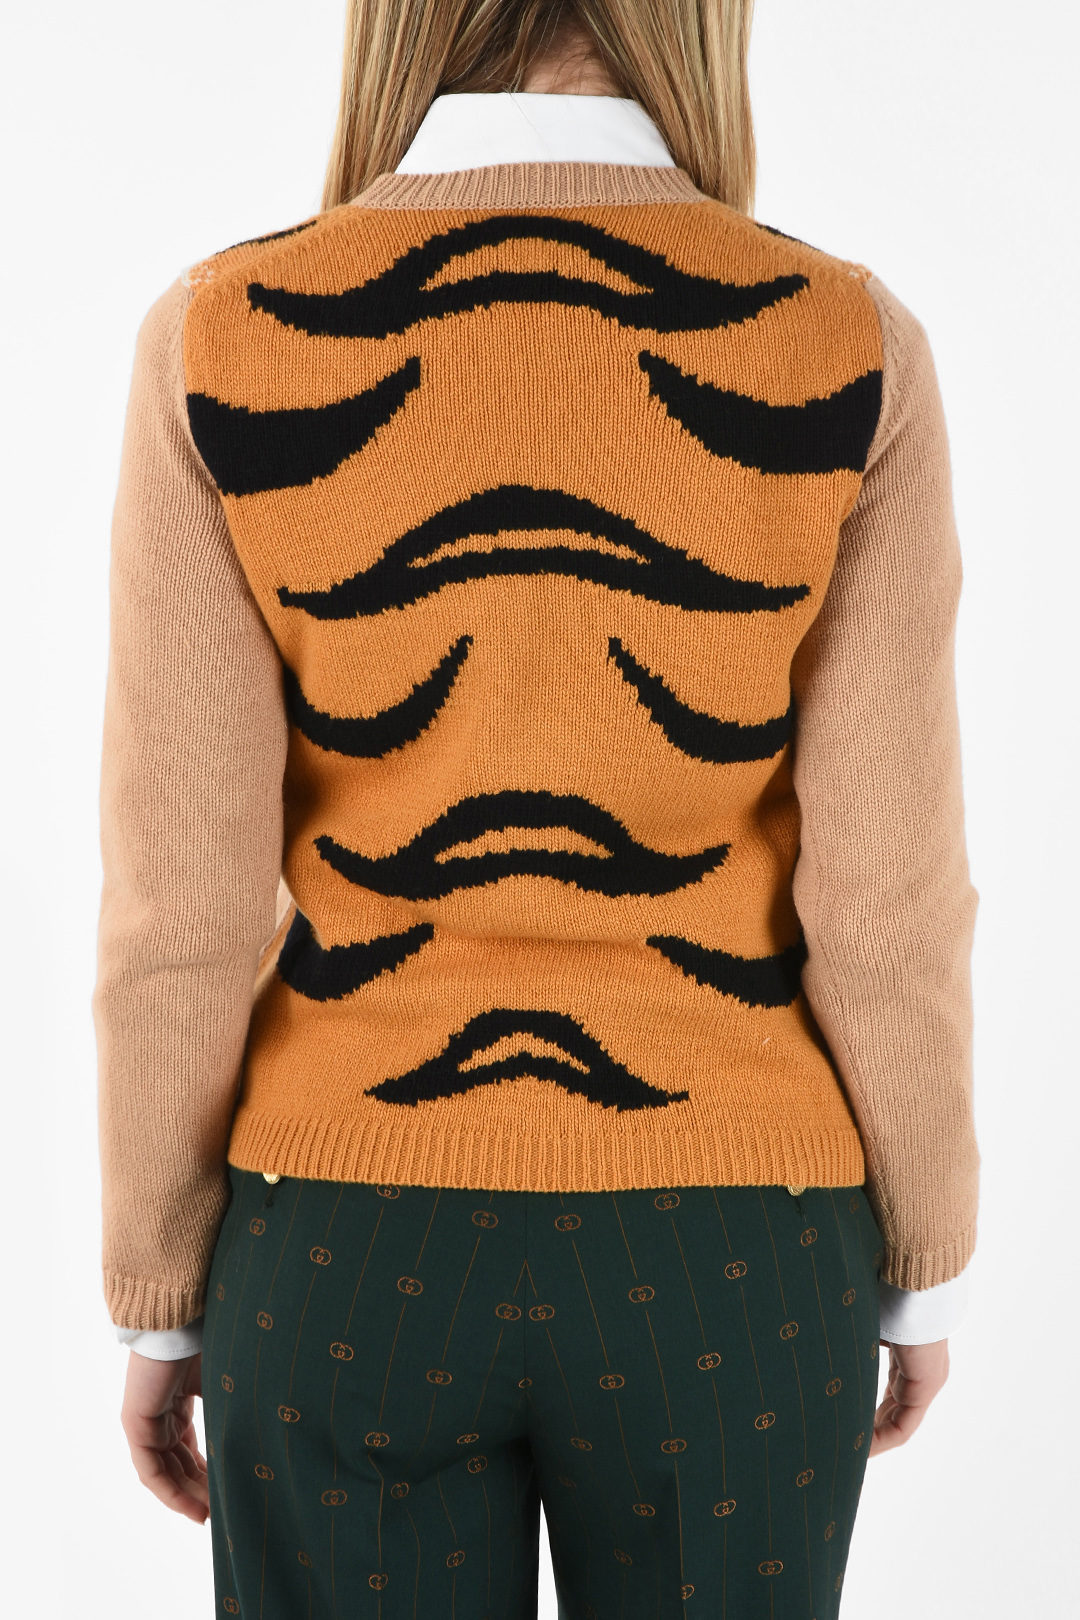 Gucci Wool Tiger Embroidered Sweater women - Glamood Outlet